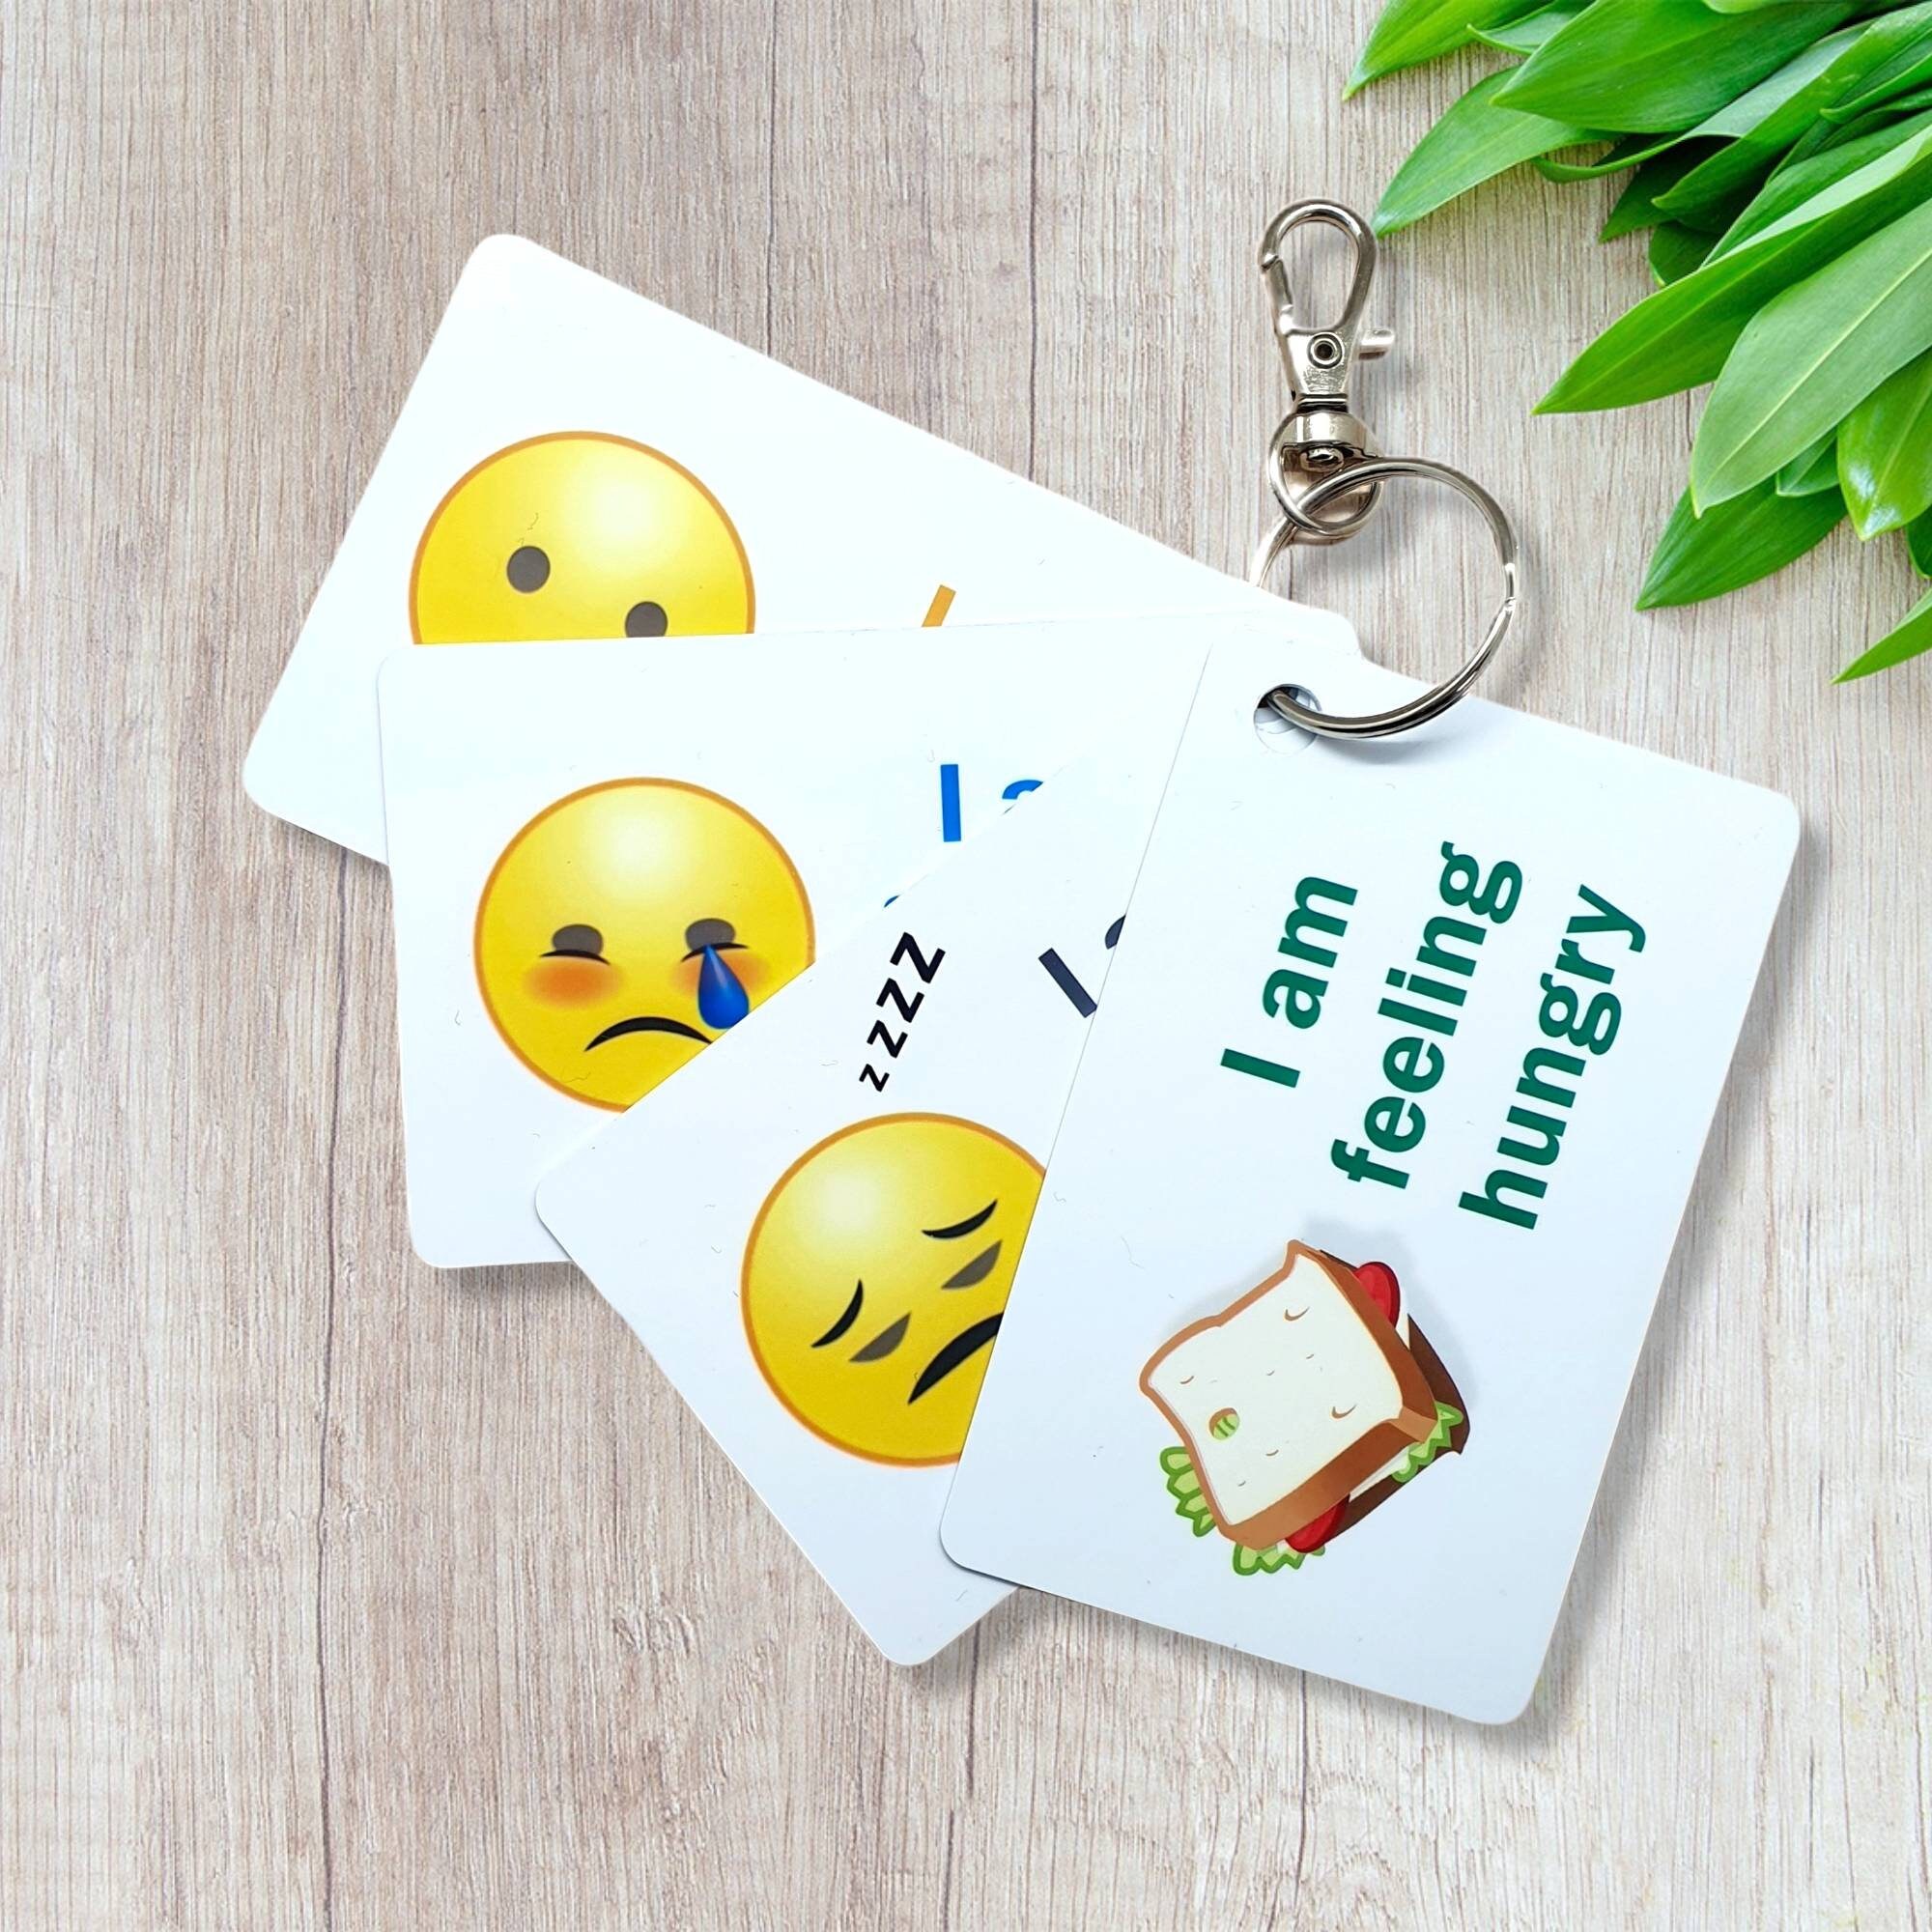 Small Key Ring Cue Cards: Feeling Faces - The Incredible Years